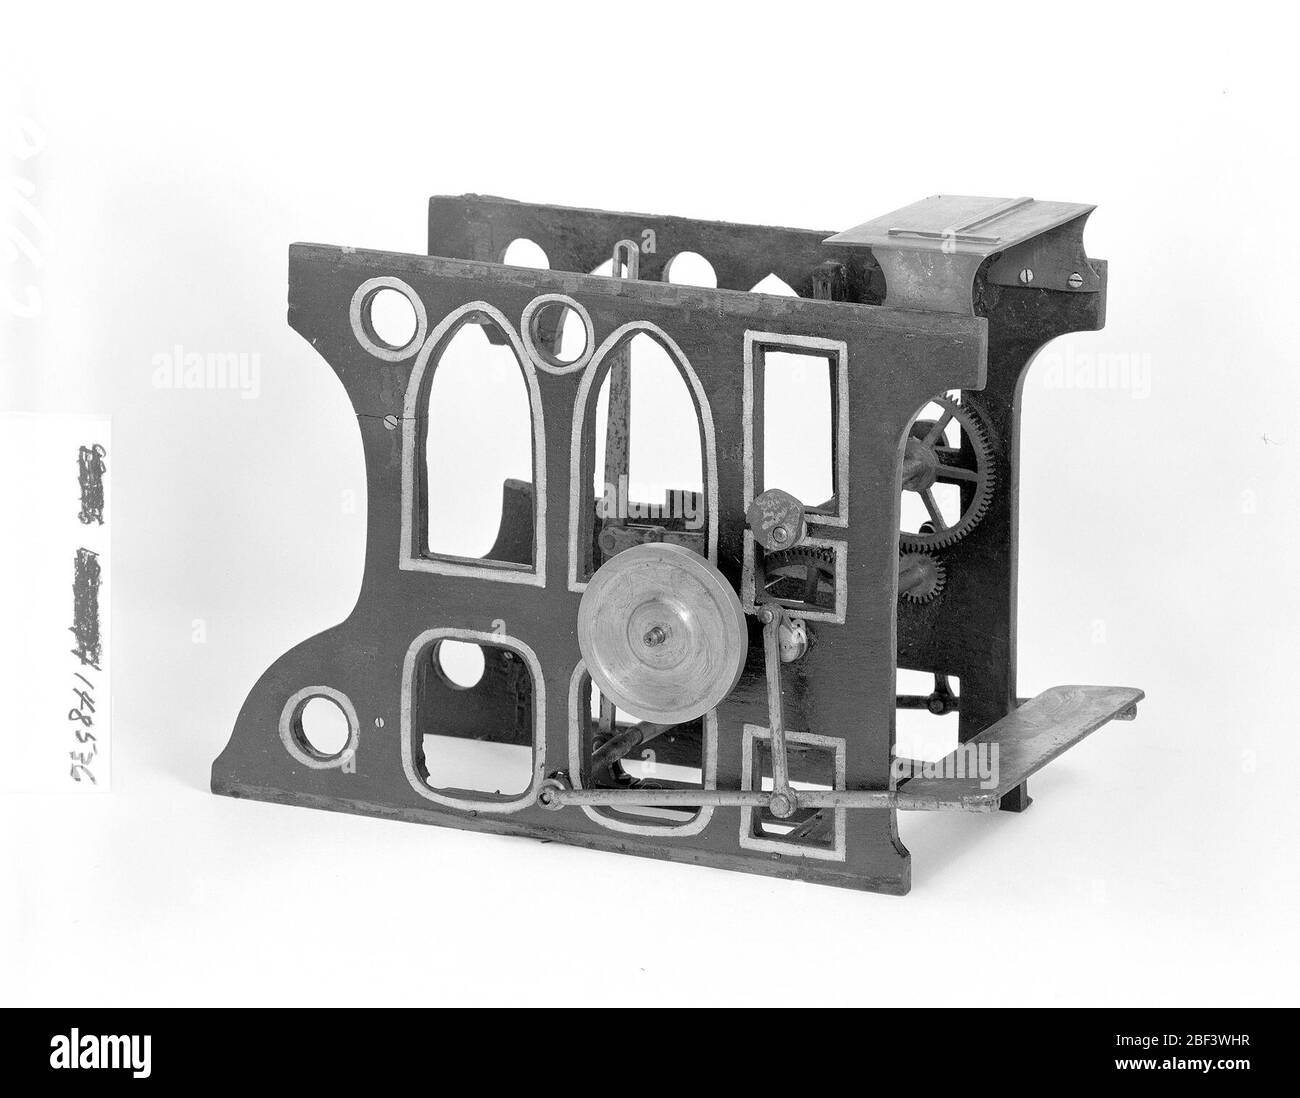 Patent Model for a Lithographic Printing Press. This patent model demonstrates an invention for a lithographic printing press which was granted patent number 148530. The patent describes a self-inking, self-dampening, flatbed cylinder press. Patentee Charles Waddie was from Edinburgh, Scotland.Currently not on view Stock Photo